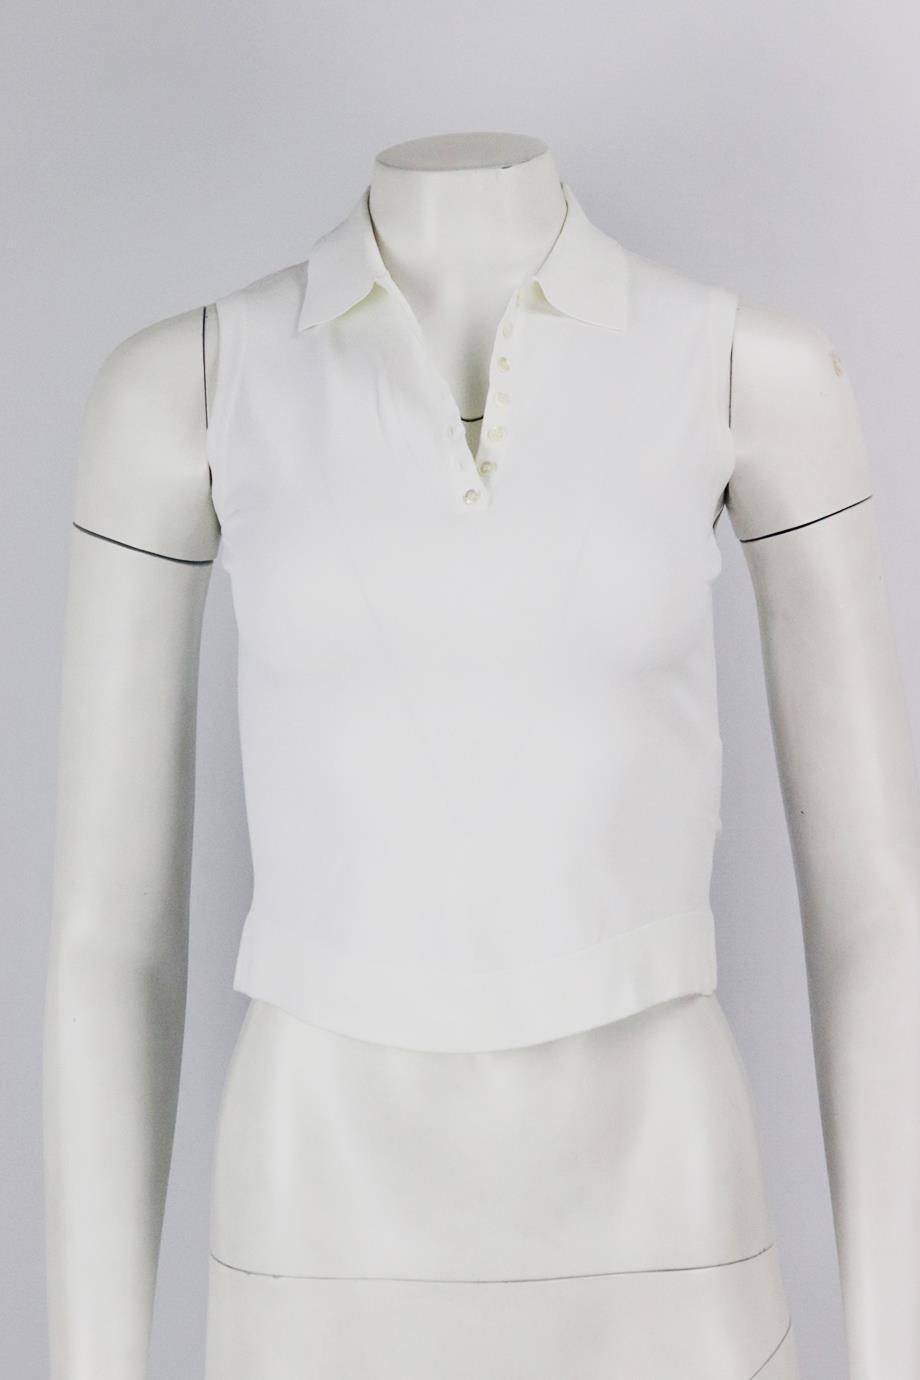 Azzedine Alaïa cropped stretch knit top. White. Sleeveless, crewneck. Slips on. 83% Viscose, 17% polyester. Size: FR 36 (UK 8, US 4, IT 40). Bust: 29 in. Waist: 26.4 in. Hips: 27.2 in. Length: 16.75. Very good condition - Light signs of wear; see